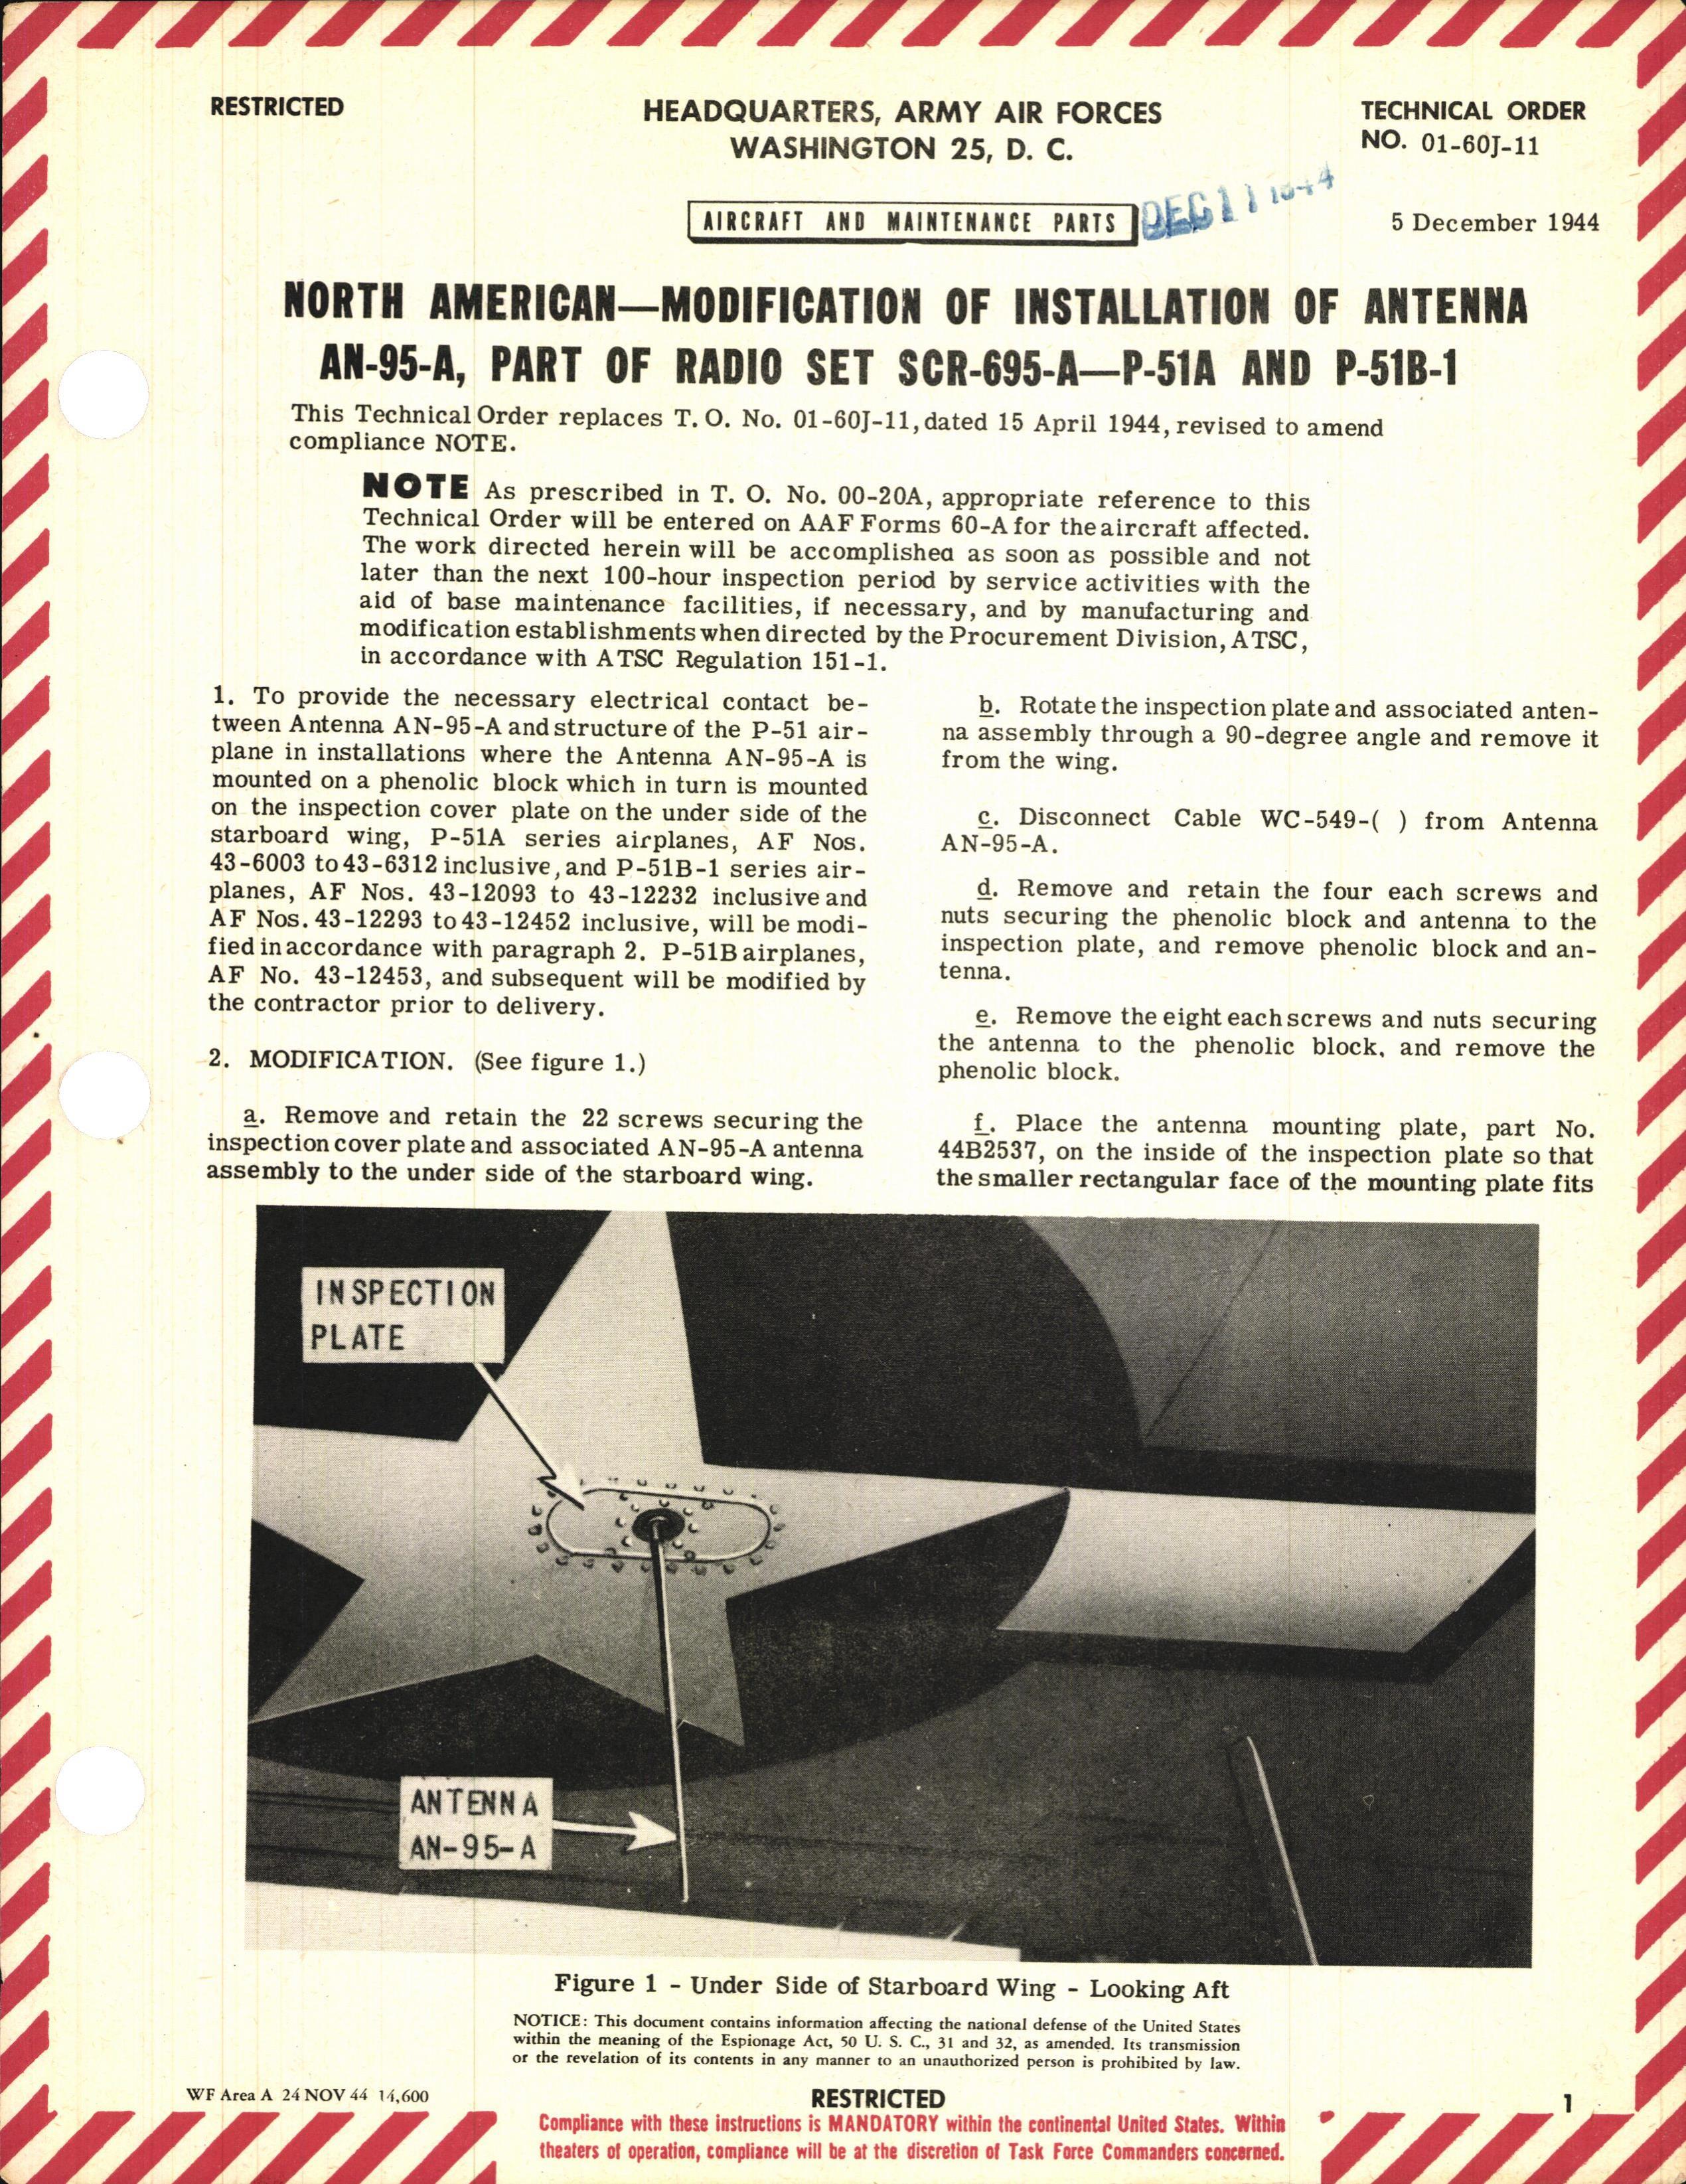 Sample page 1 from AirCorps Library document: Modification of Installation of Antenna AN-95-A, Part of Radio Set SCR-695-A